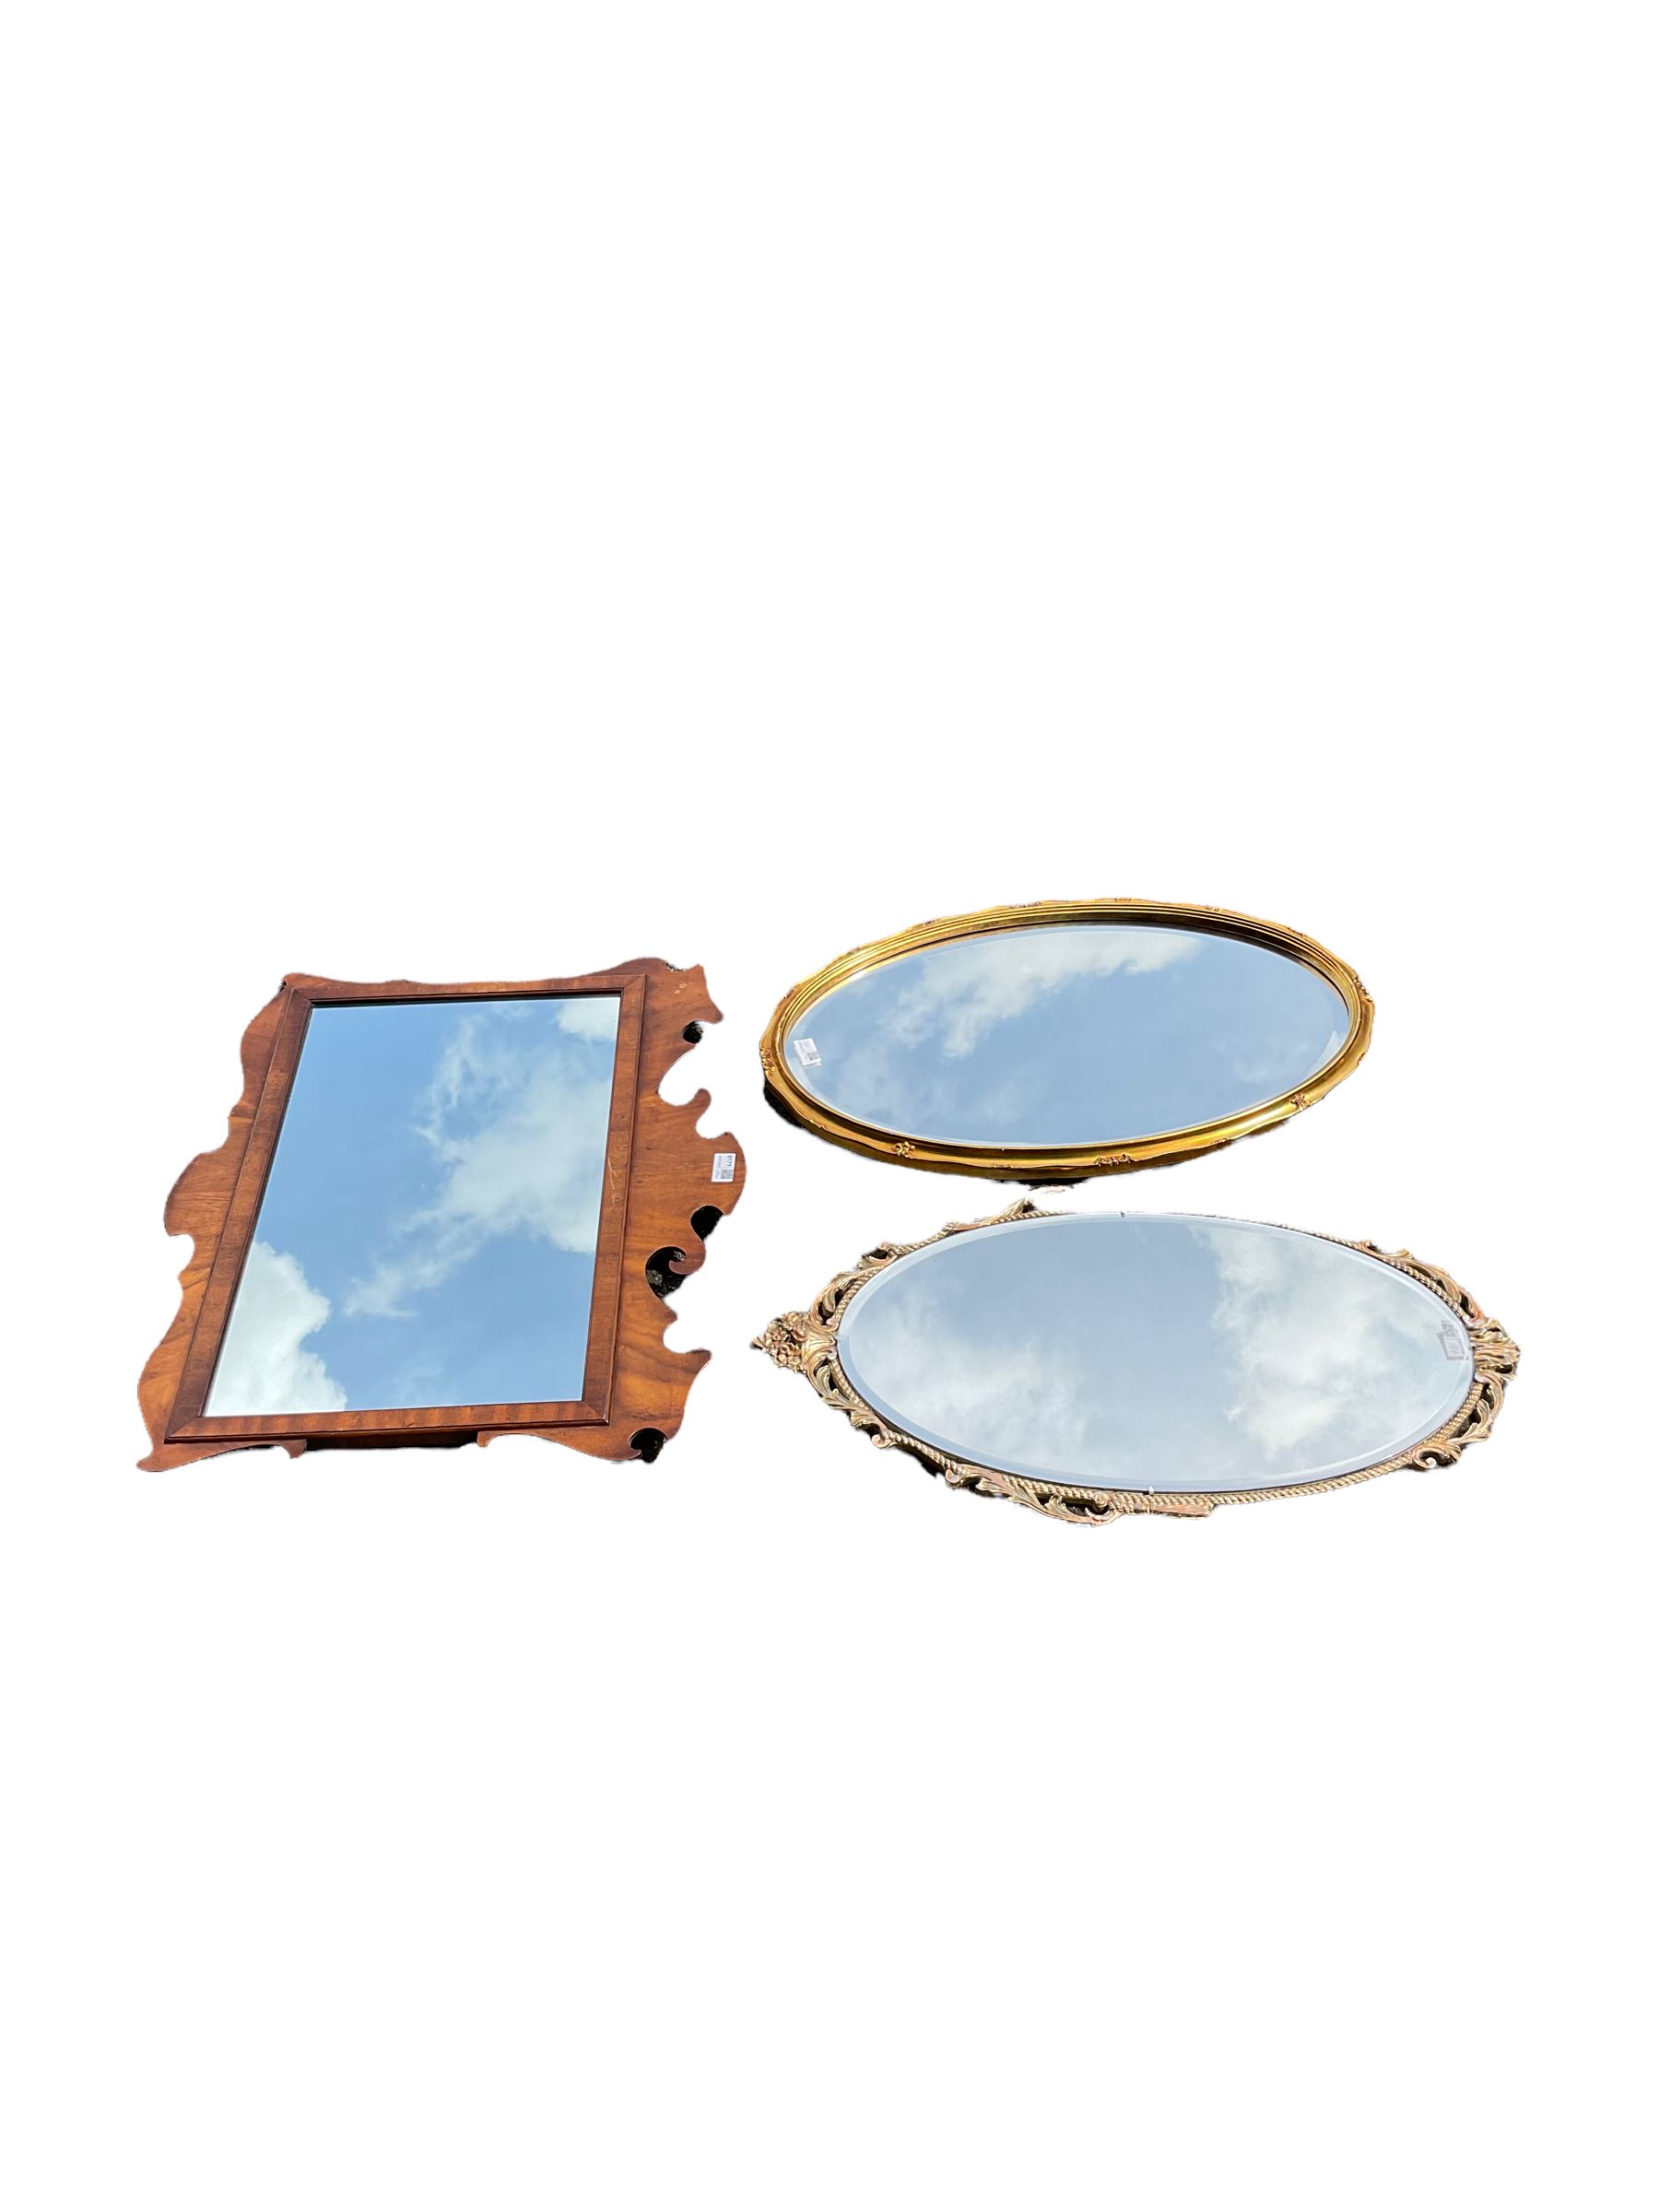 Bevan Funnell walnut framed mirror and two ornate oval gilt framed mirrors (3)